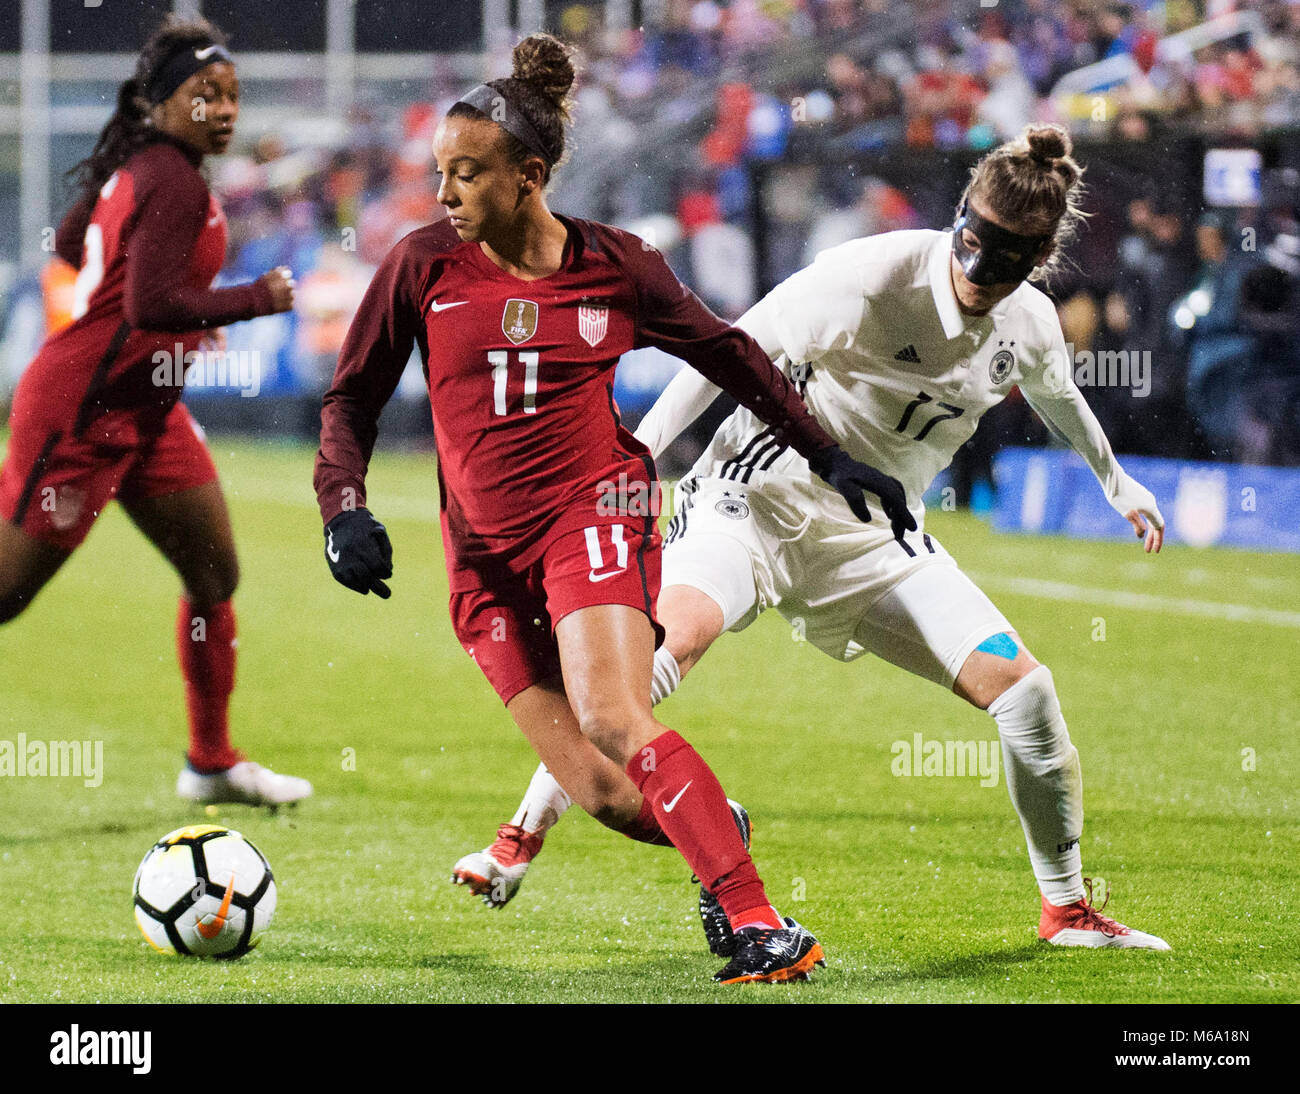 Columbus, Ohio, USA. March 1, 2018: USA forward Mallory Pugh (11) fights for the ball against Germany defender Verena Faisst (17)during their match at the SheBelieves Cup in Columbus, Ohio, USA. Brent Clark/Alamy Live  News Stock Photo